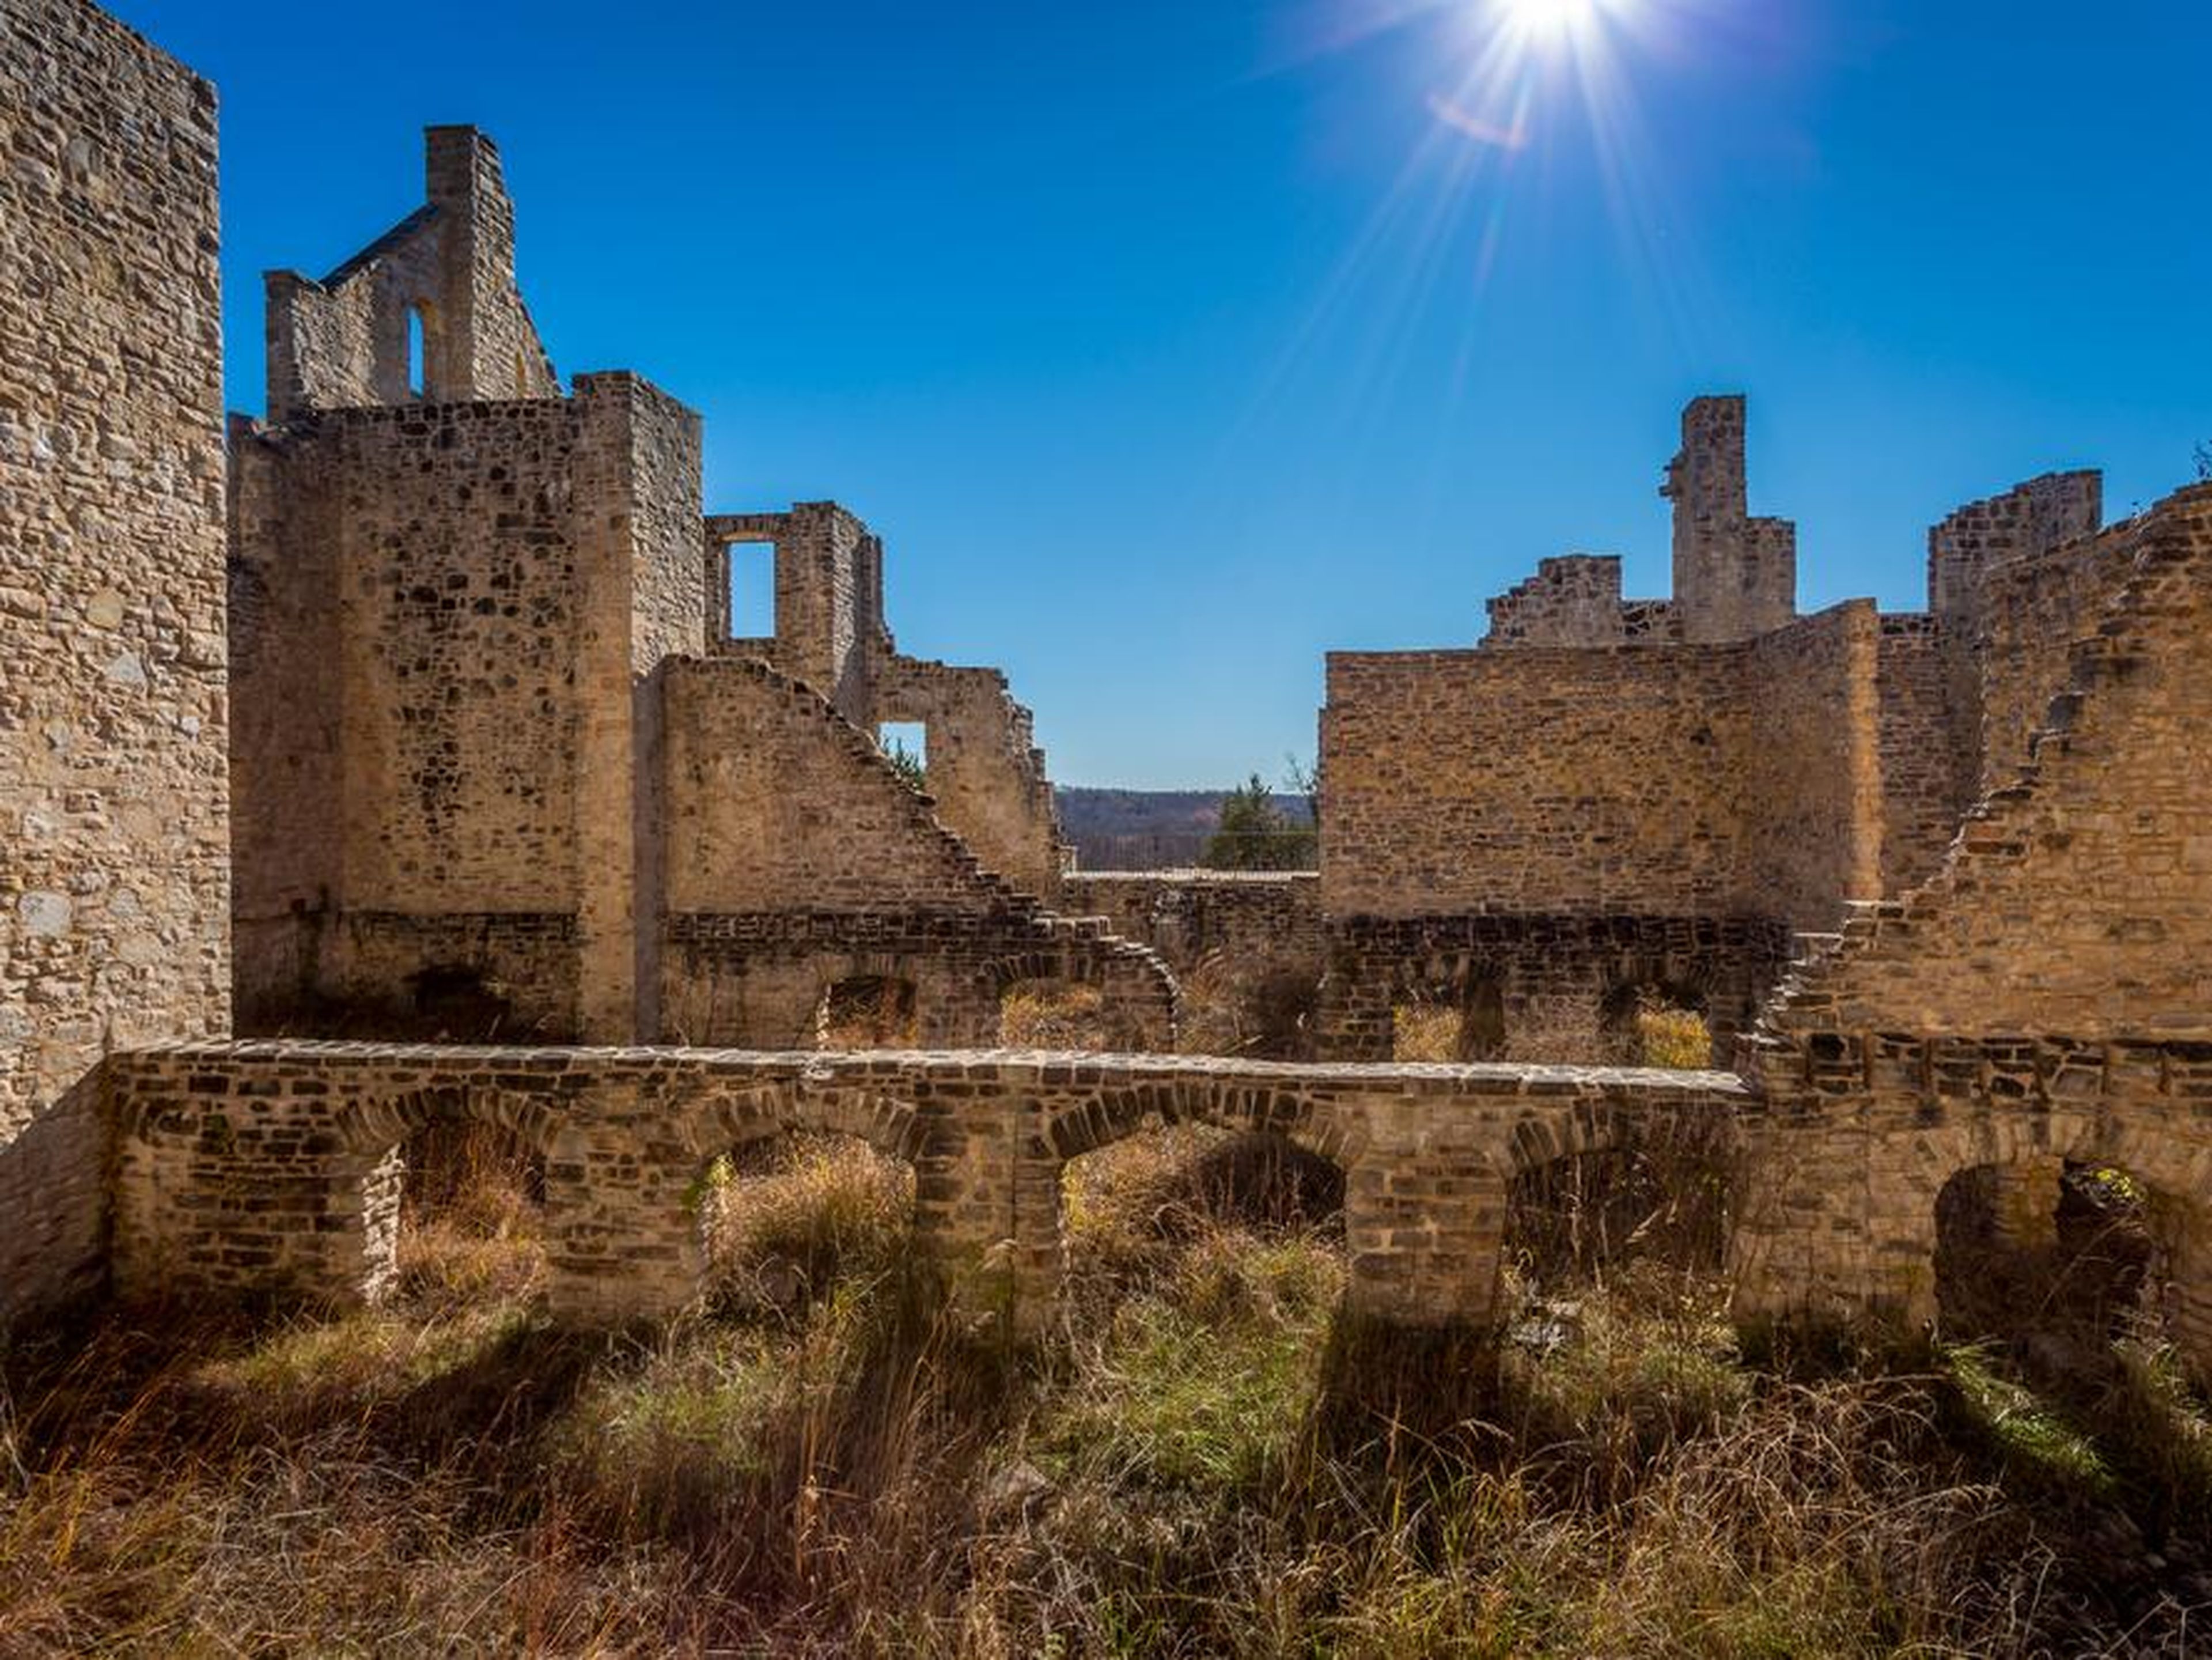 These ruins that resemble an ancient European castle actually sit just outside of Kansas City, Missouri, and are the results of a dream of businessman Robert Snyder, who wanted to build a European-style castle in Missouri.